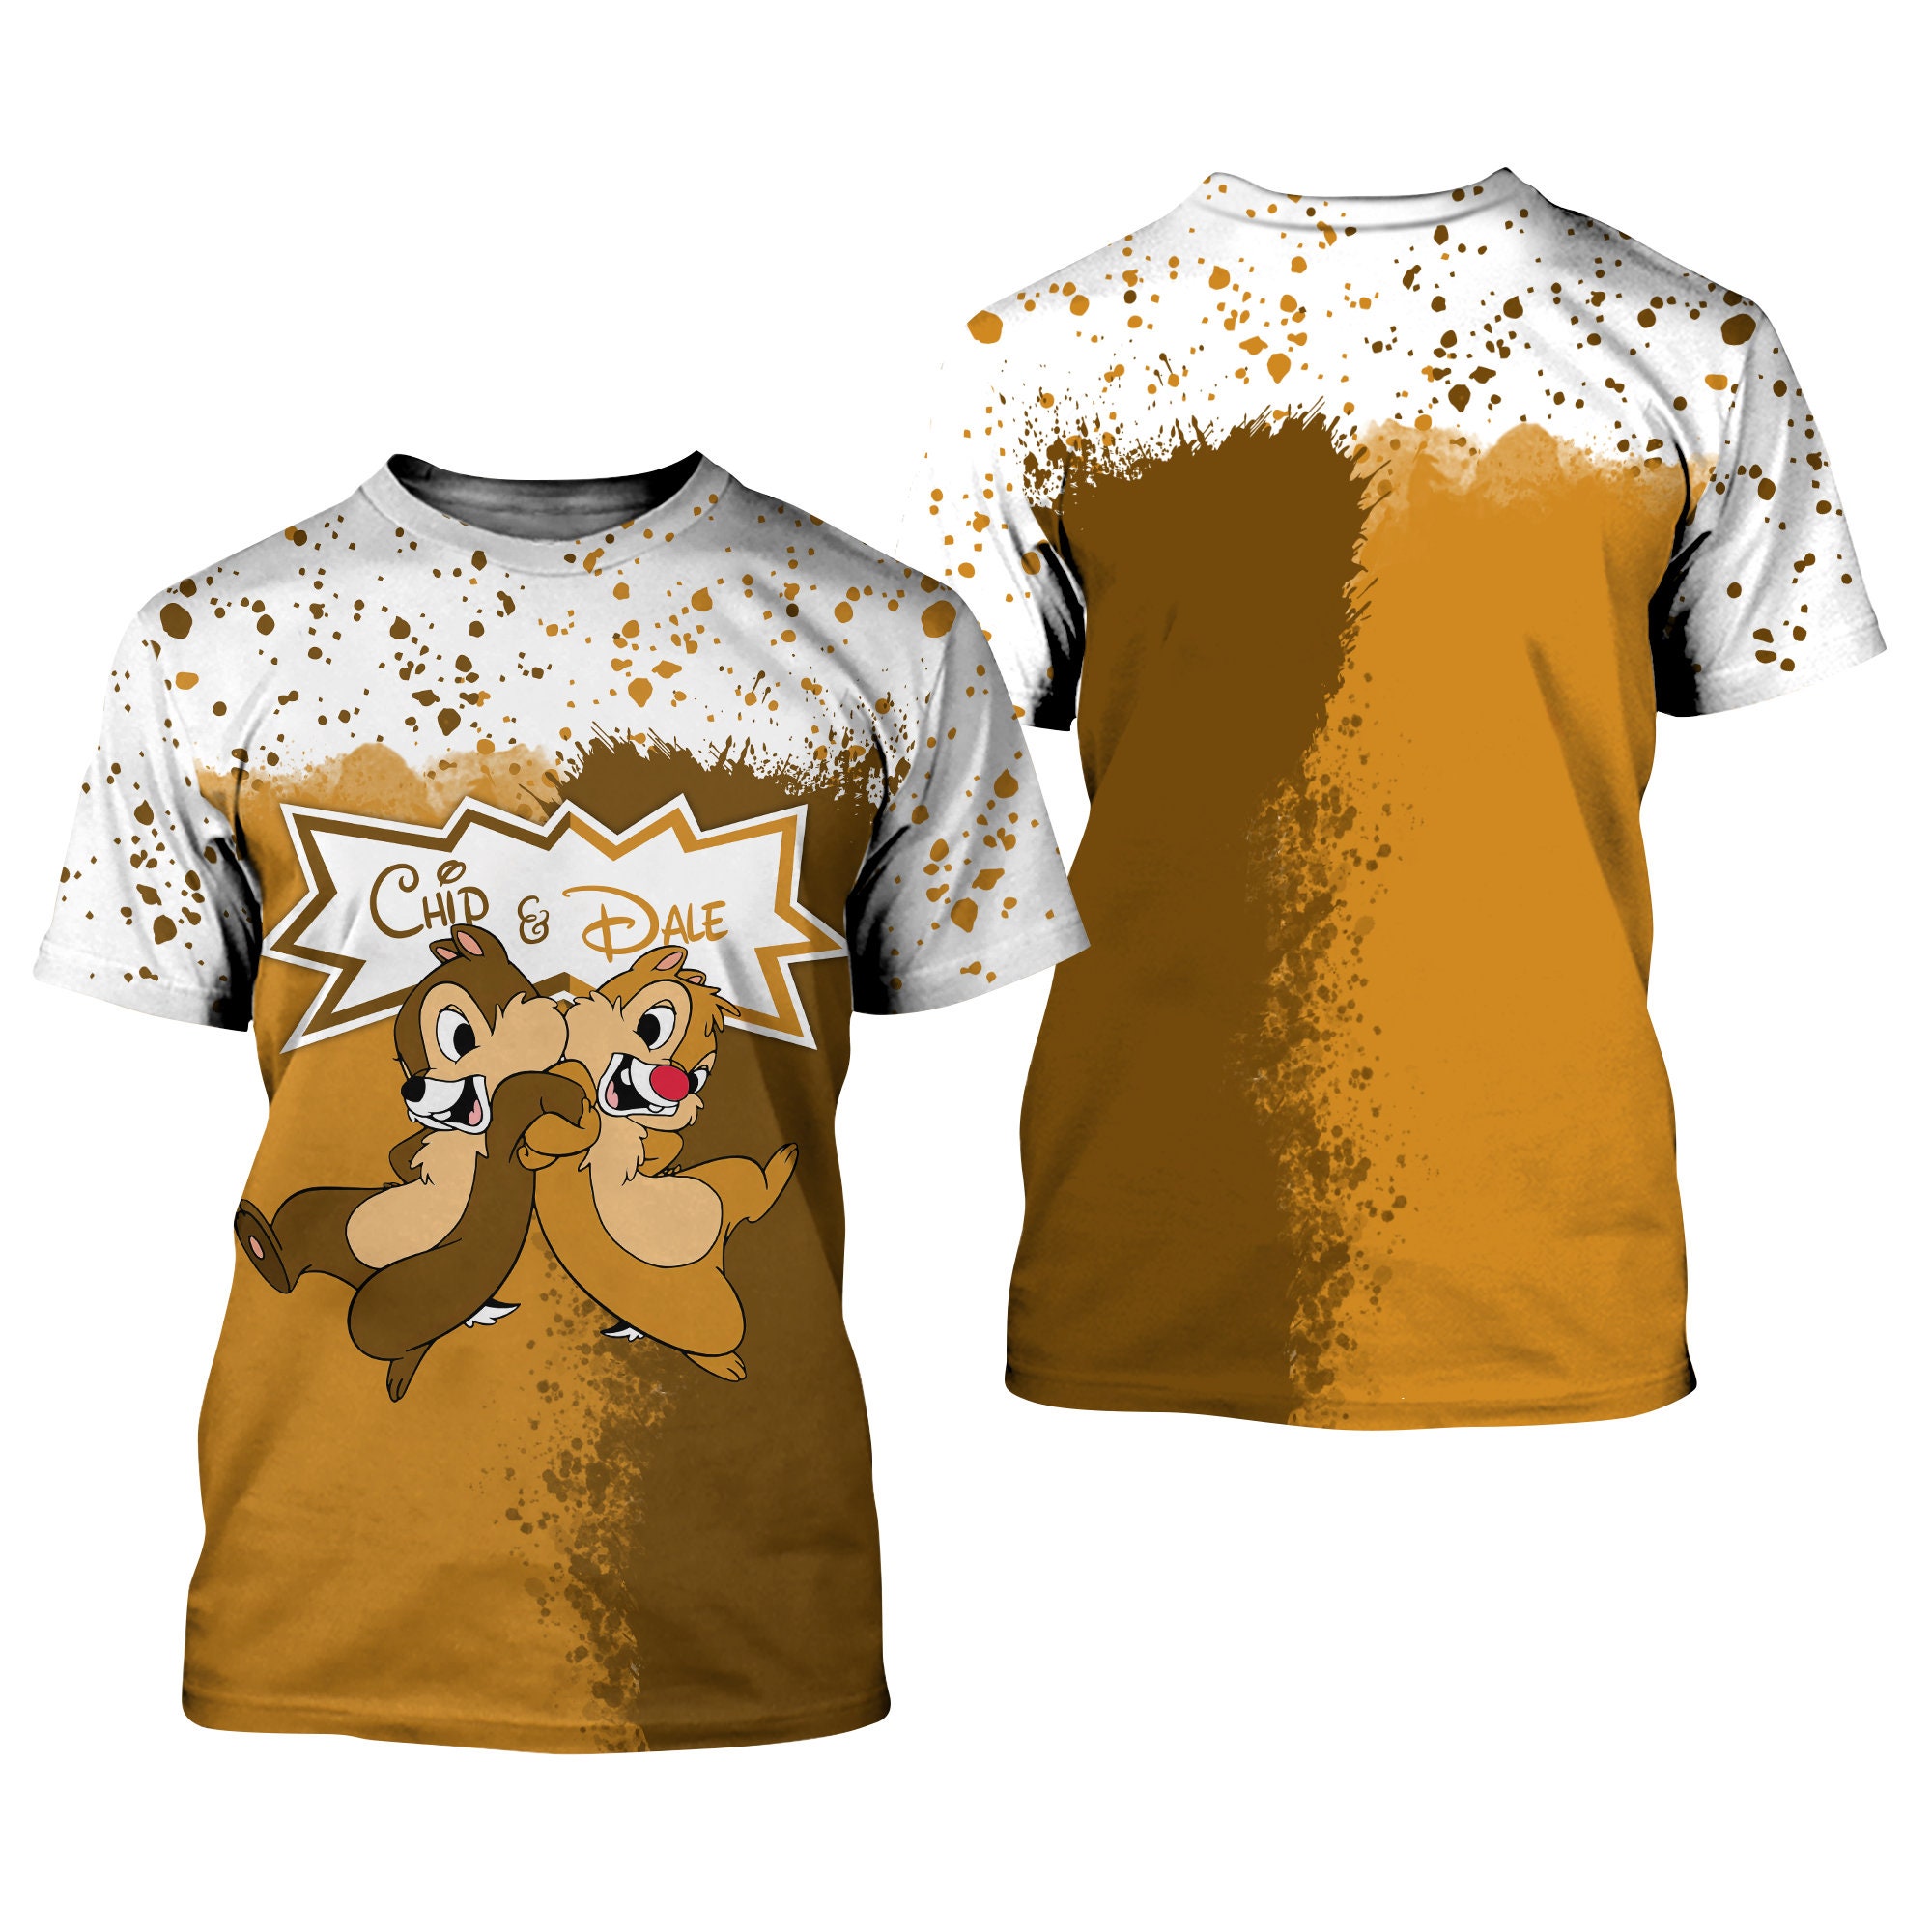 Discover Maglietta Stampa 3D Chip And Dale Uomo Donna Bambini Chipmunks Brown Splatter Paint Graphics Cartoon